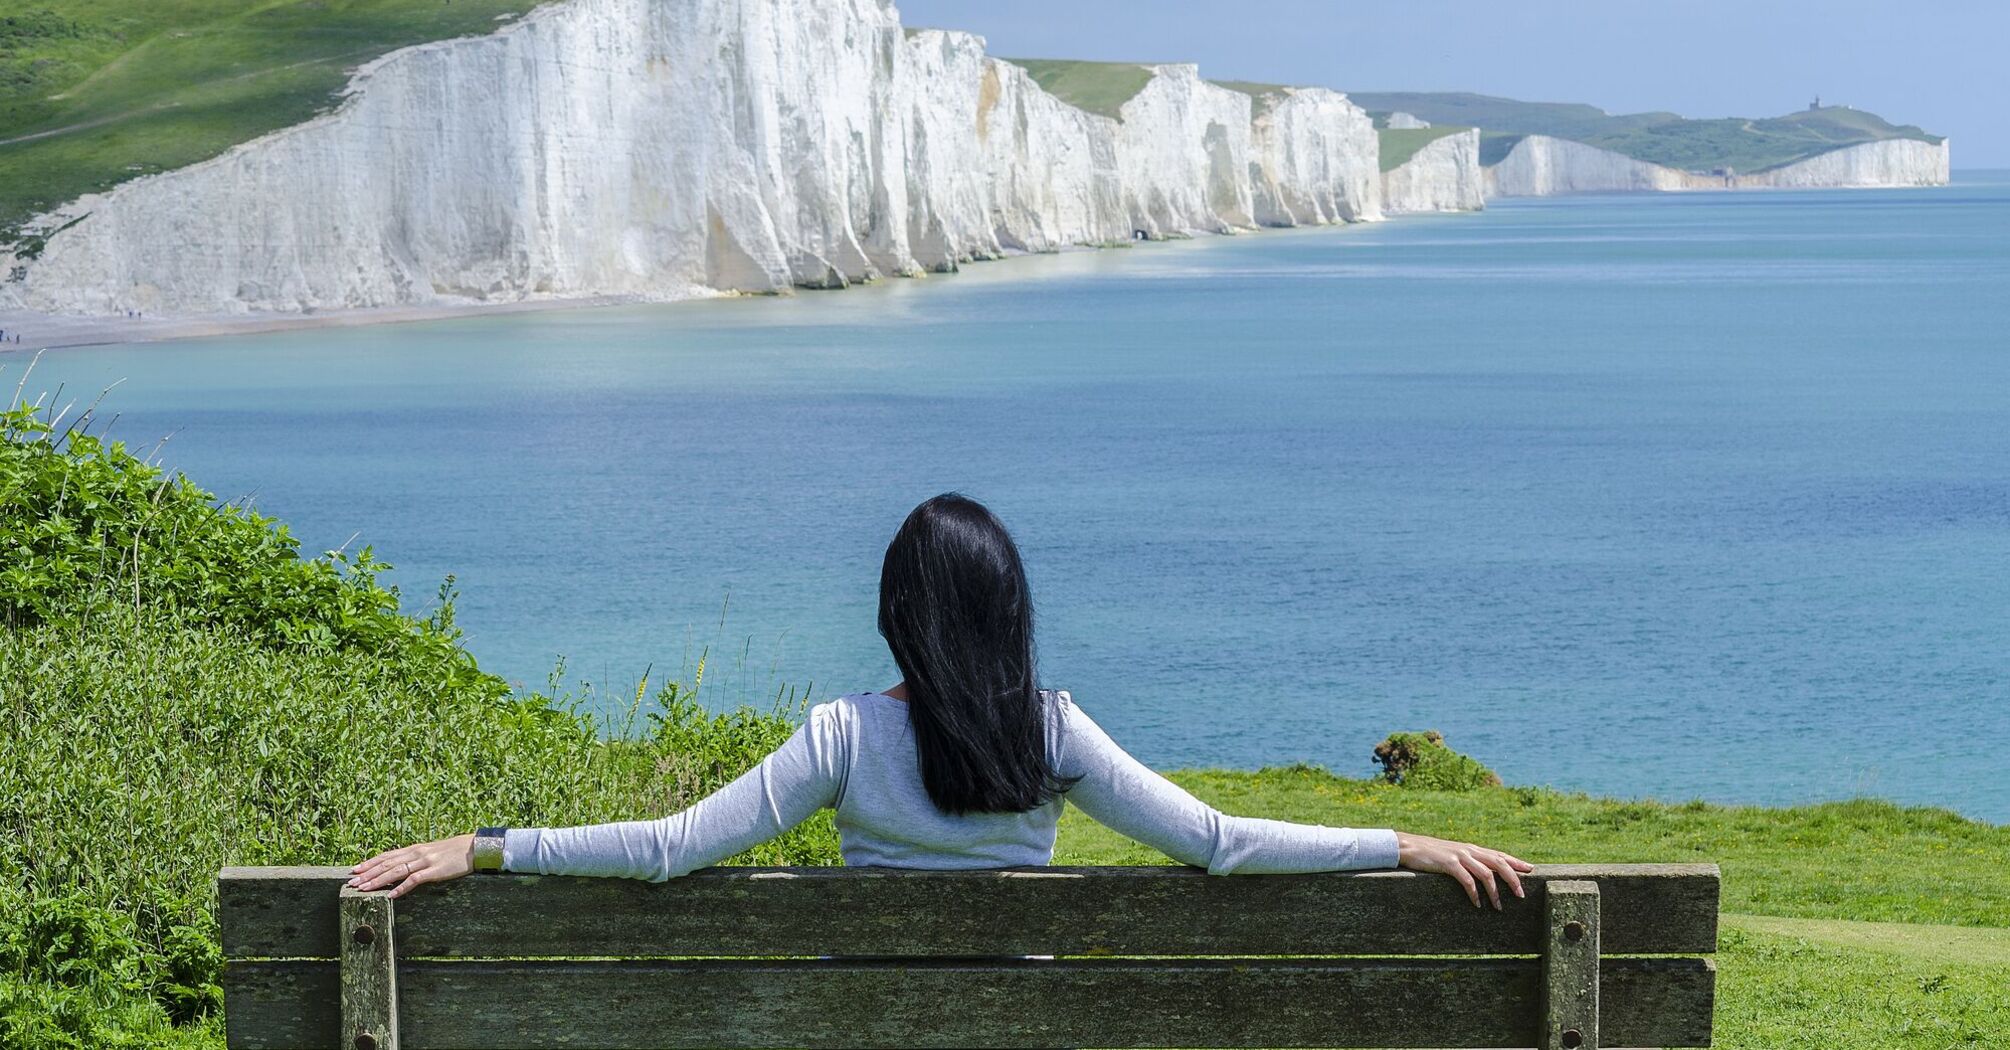 The seaside town of Eastbourne was named the most romantic place in the UK